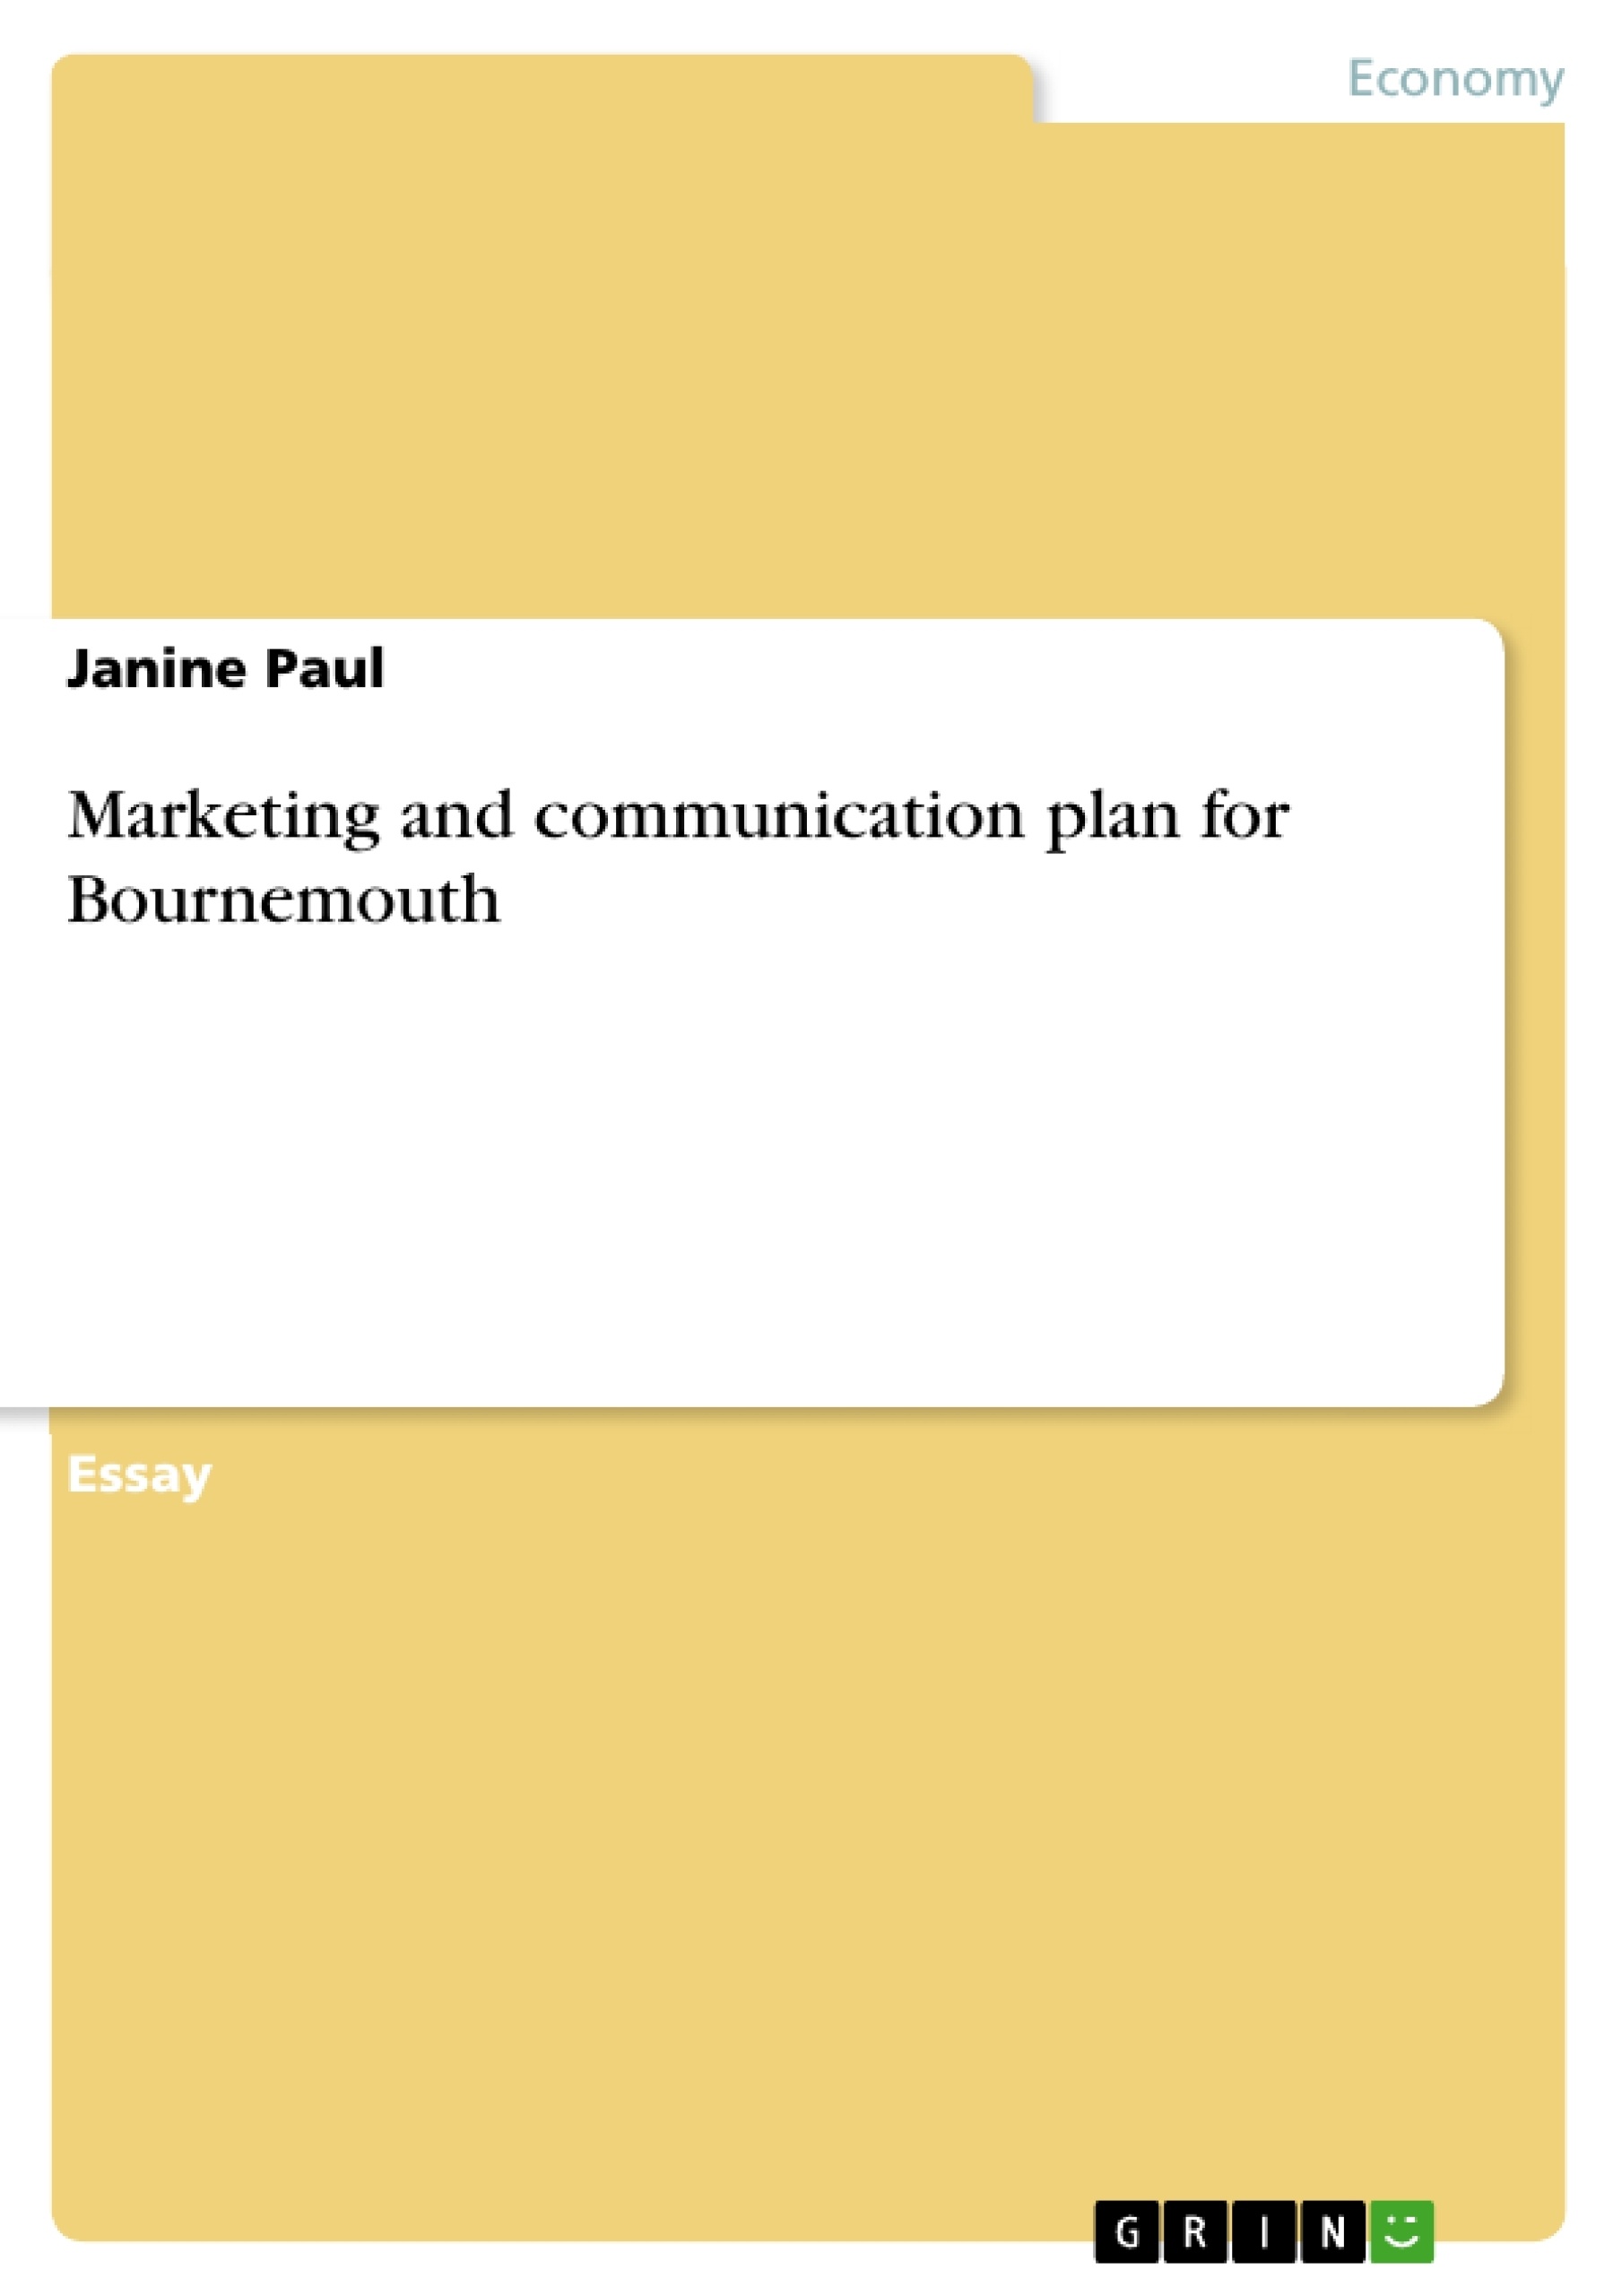 Title: Marketing and communication plan for Bournemouth